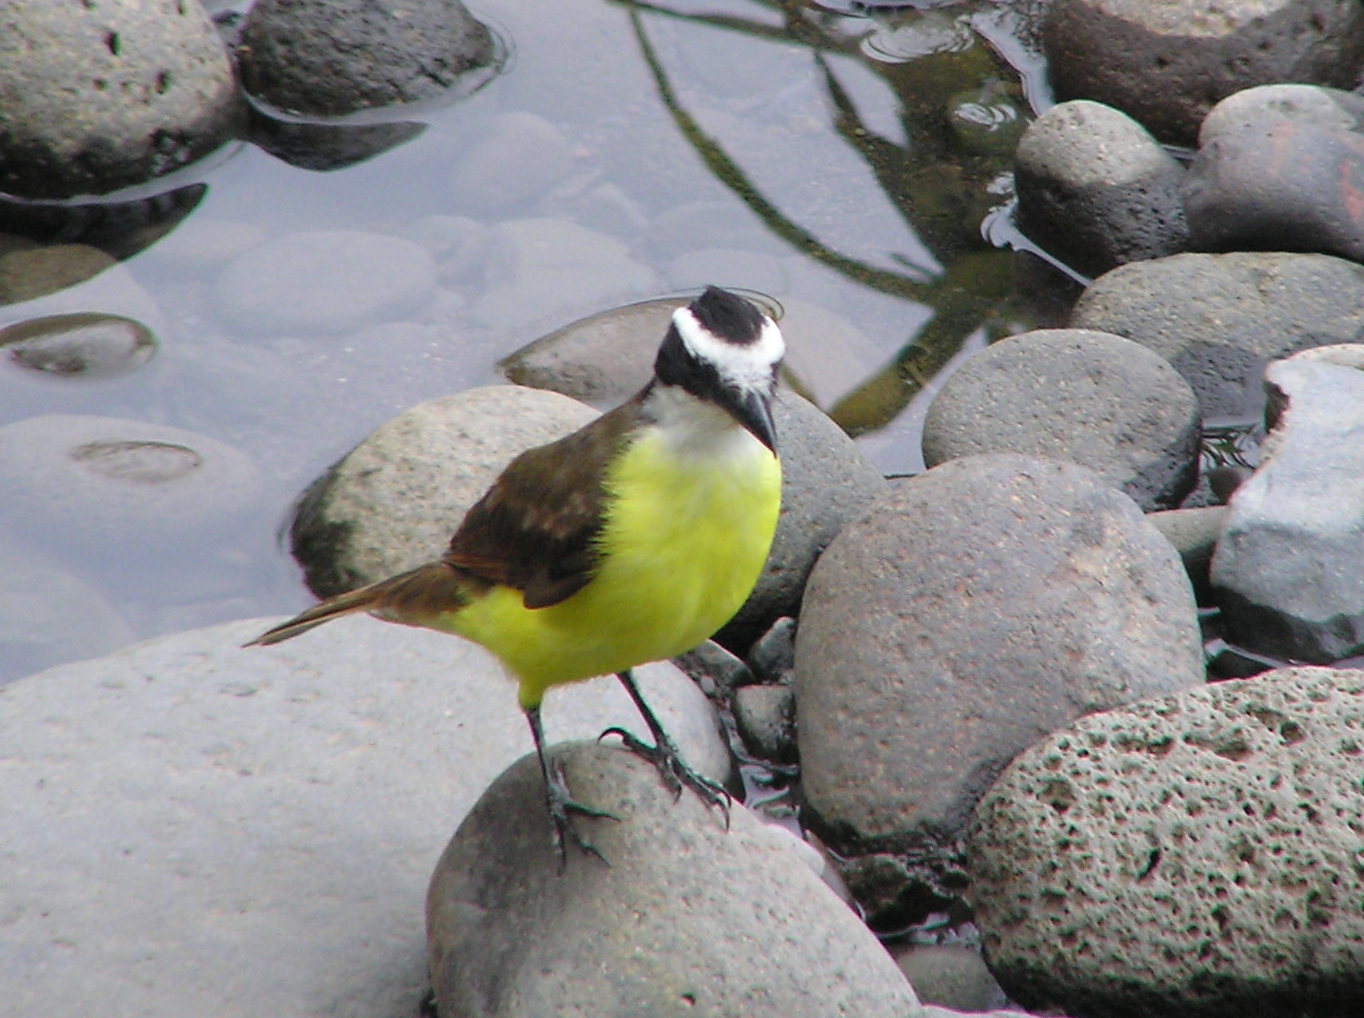 Click picture to see more Great Kiskadee photos.